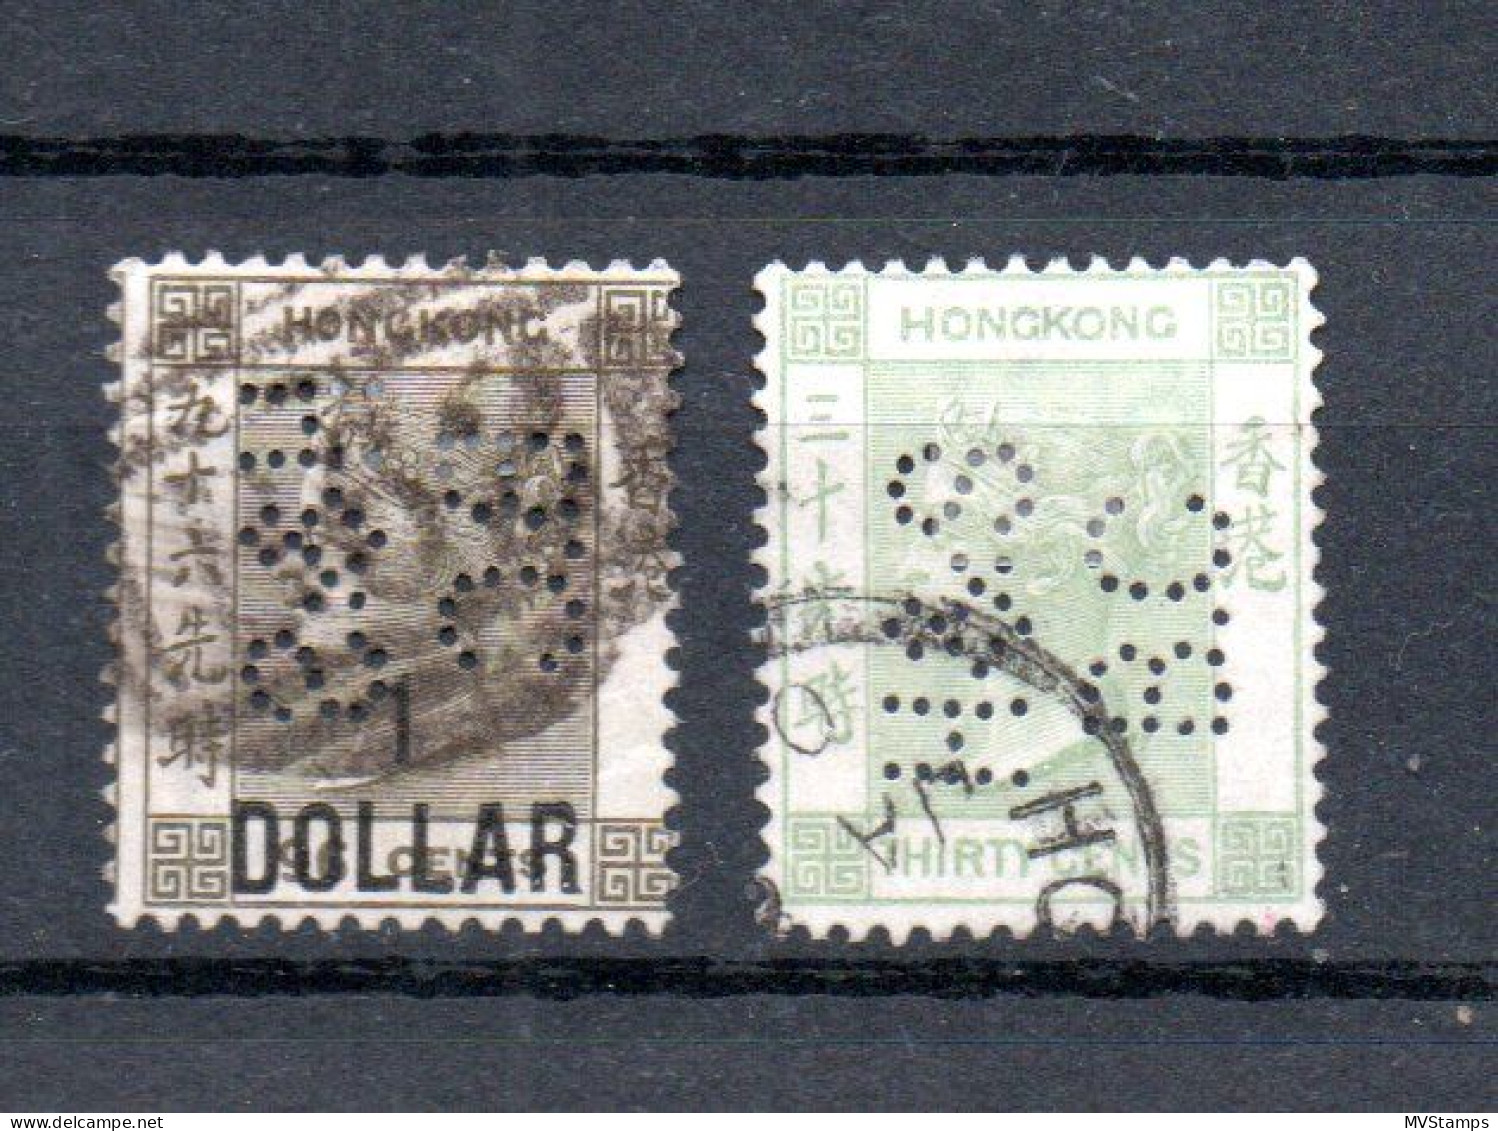 Hong Kong 1885/91 Old Def.Victoria Stamps With Perforation (HSBC) Nice Used - Gebraucht